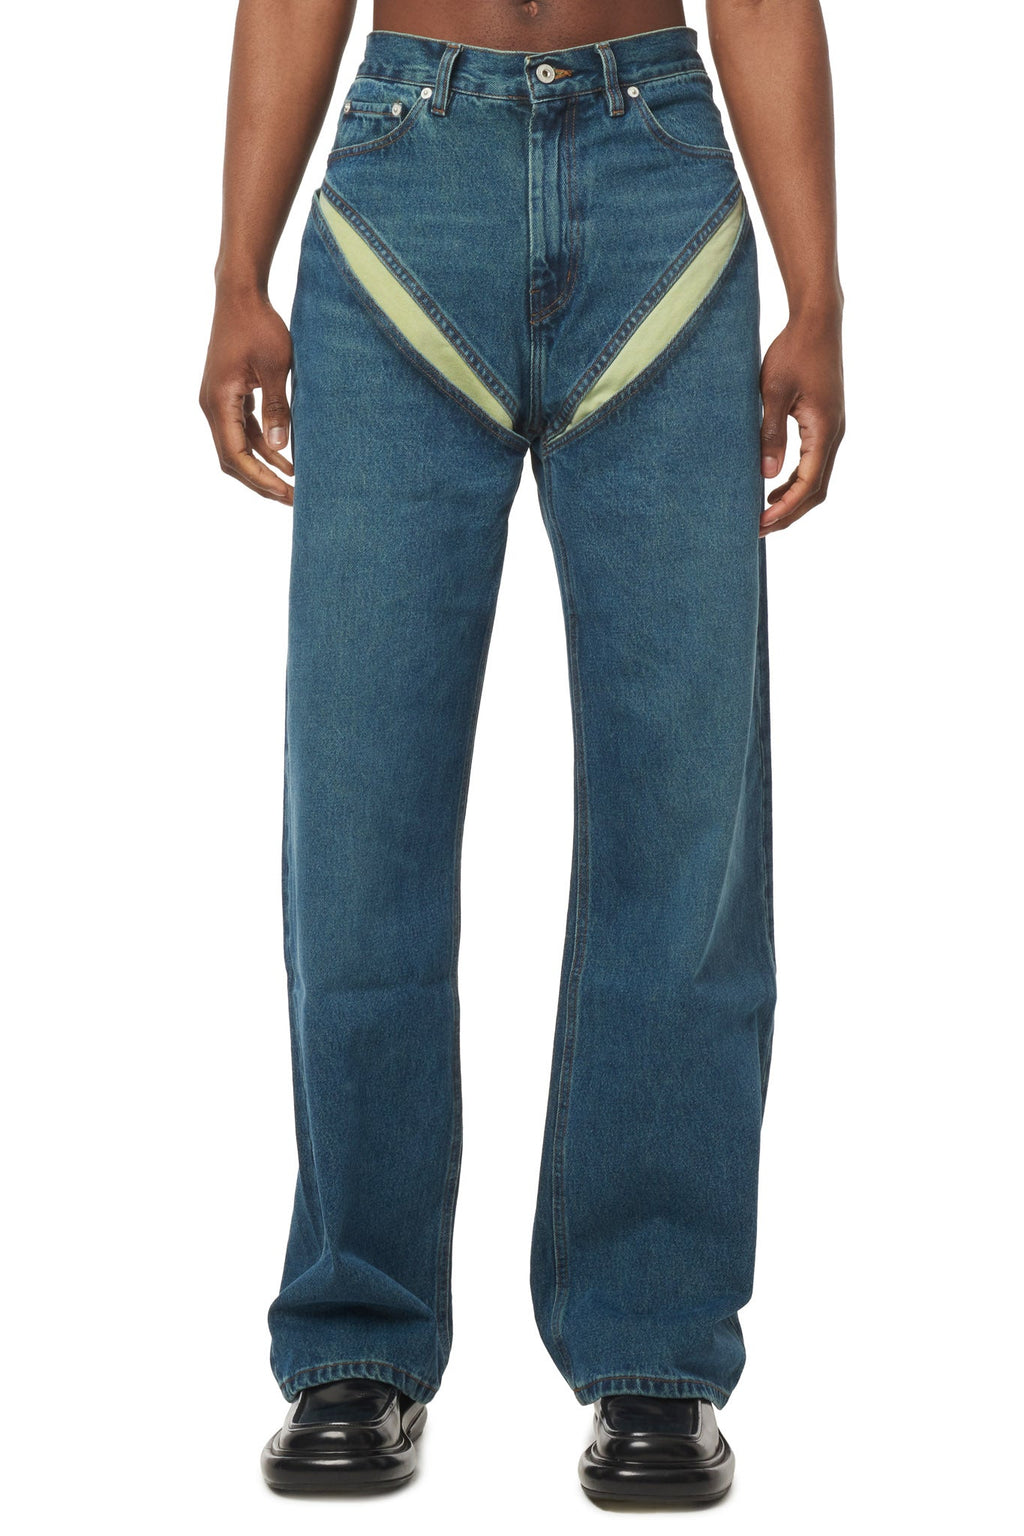 Y/Project Evergreen Cut Out Jeans